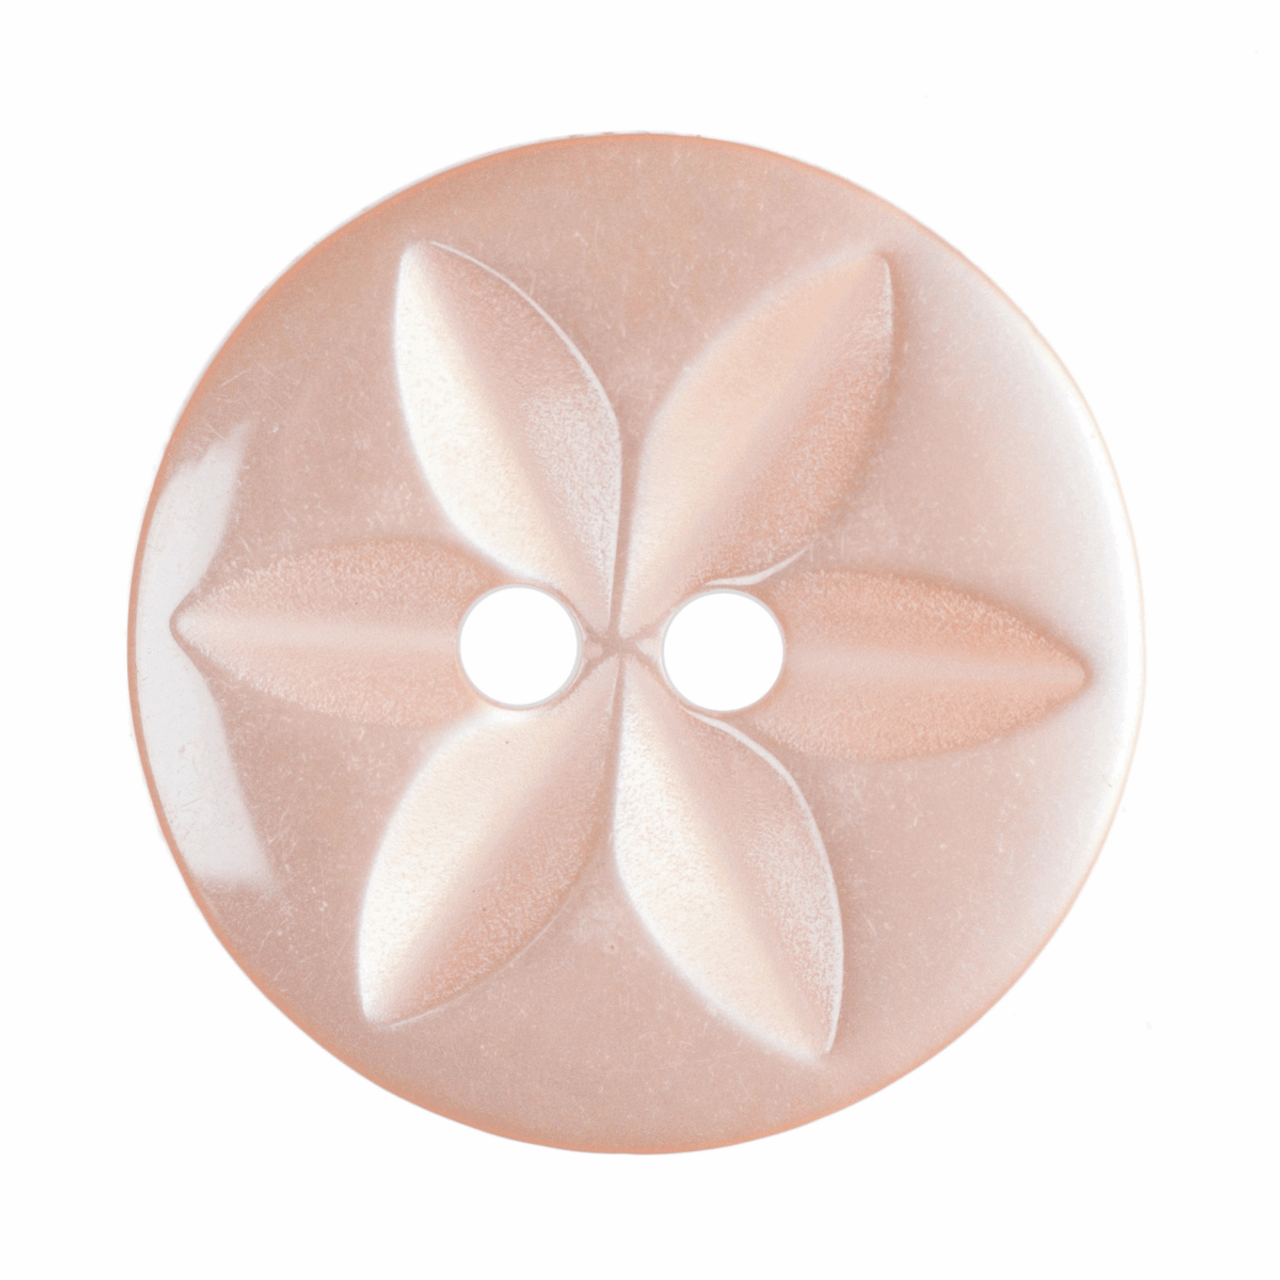 Peach Star Button, 16mm (5/8in) Diameter (Sold Individually)